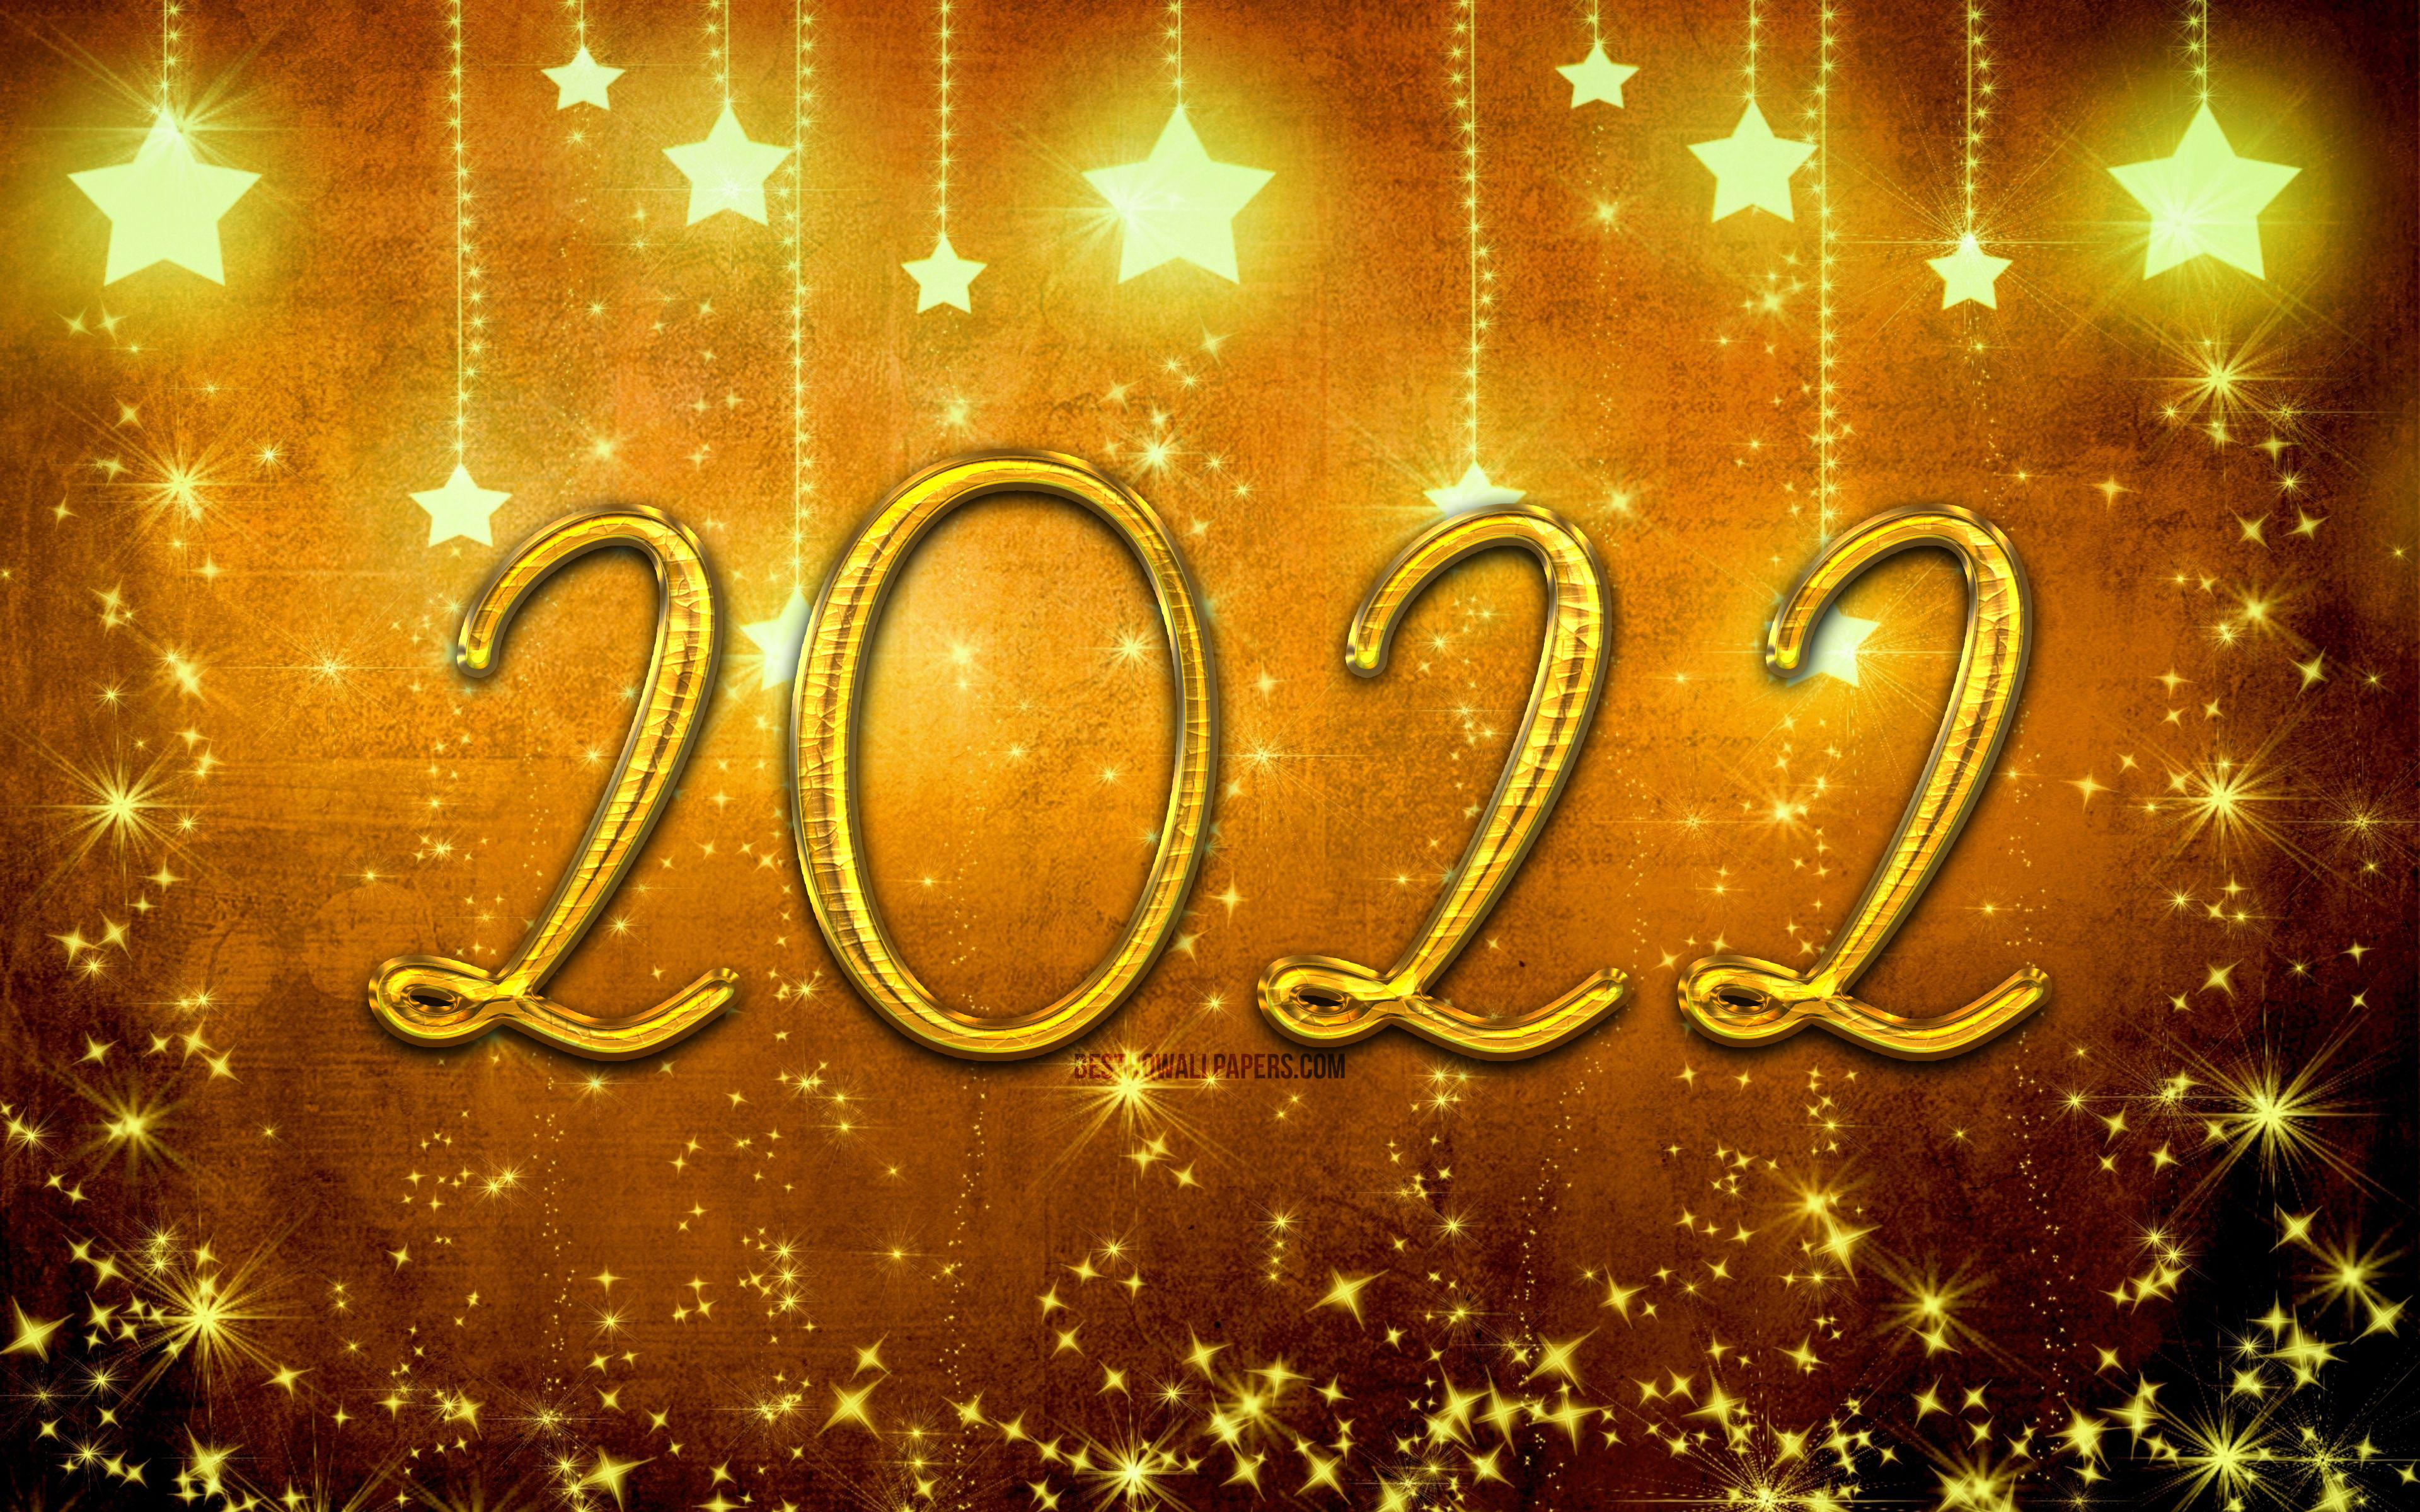 Download wallpaper 4k, 2022 golden 3D digits, stars, Happy New Year christmas decorations, starry background, golden xmas balls, 2022 concepts, 2022 new year, 2022 on yellow background, 2022 year digits for